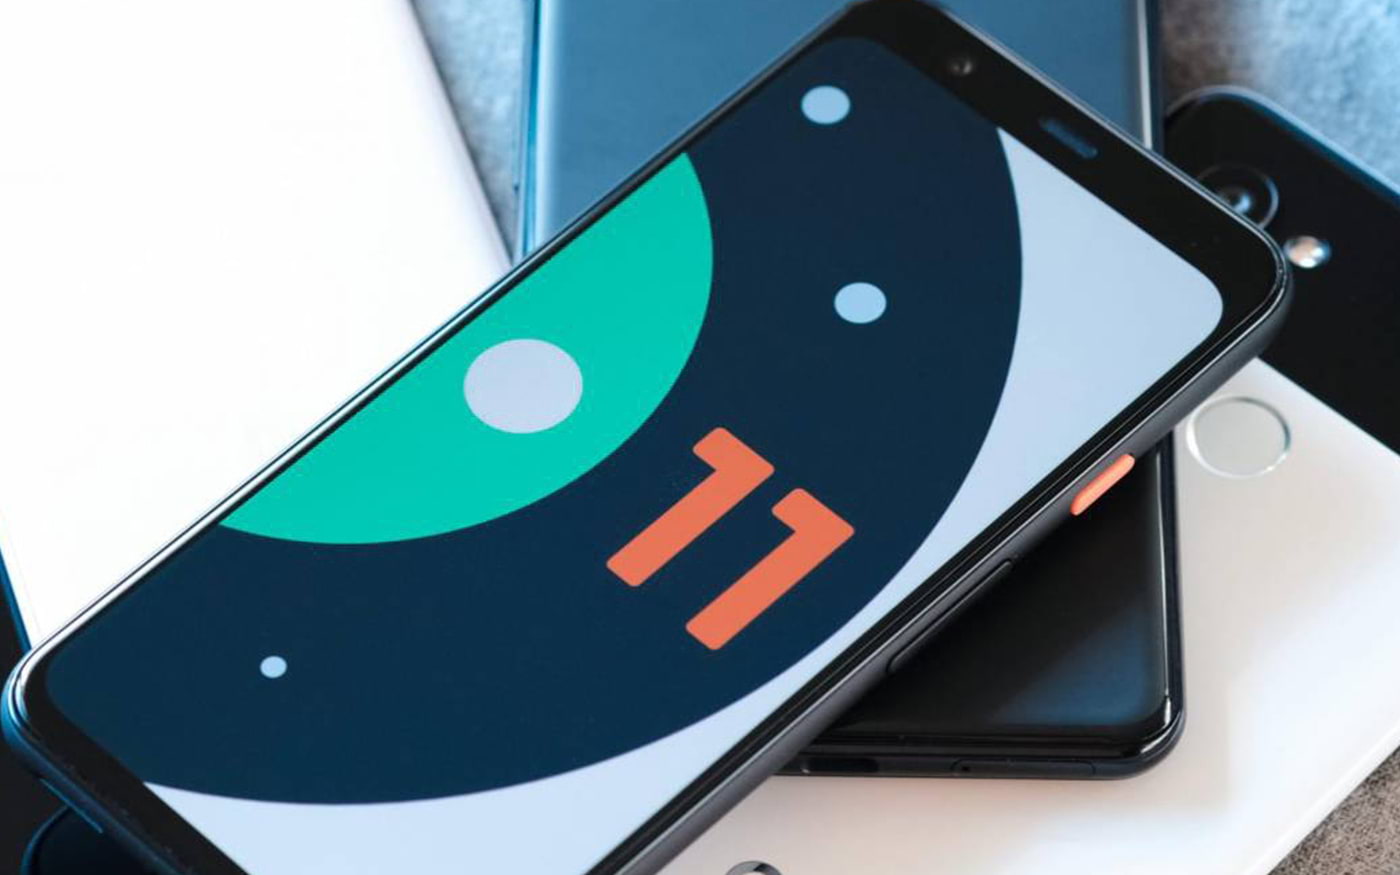 Check out what's new in the first beta of Android 11